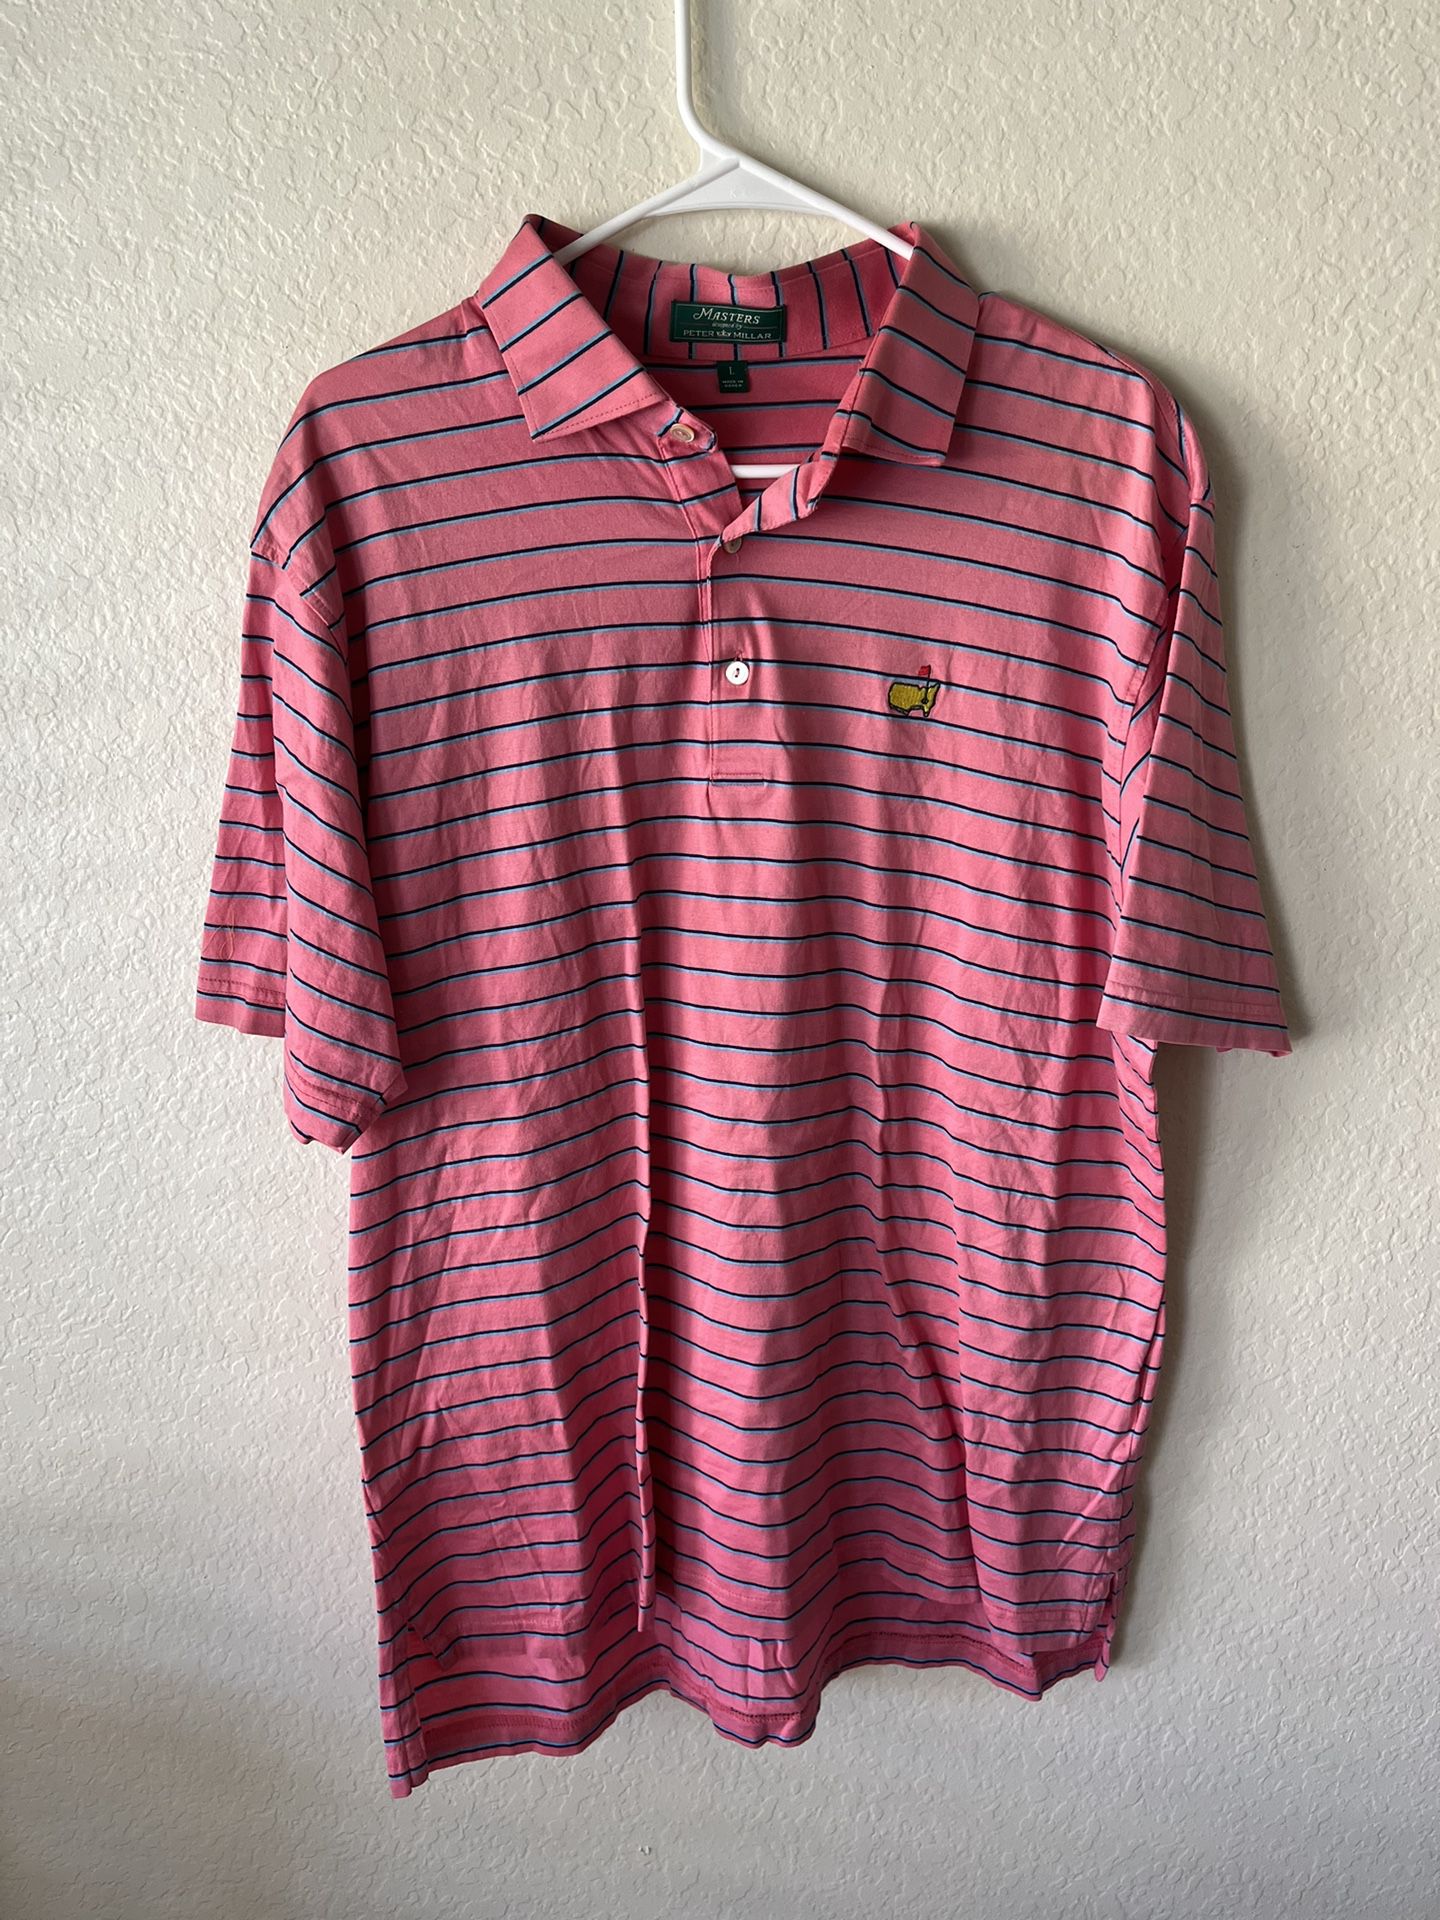 Masters Designed by Peter Millar Polo Shirt Mens Large Pink Striped Golf